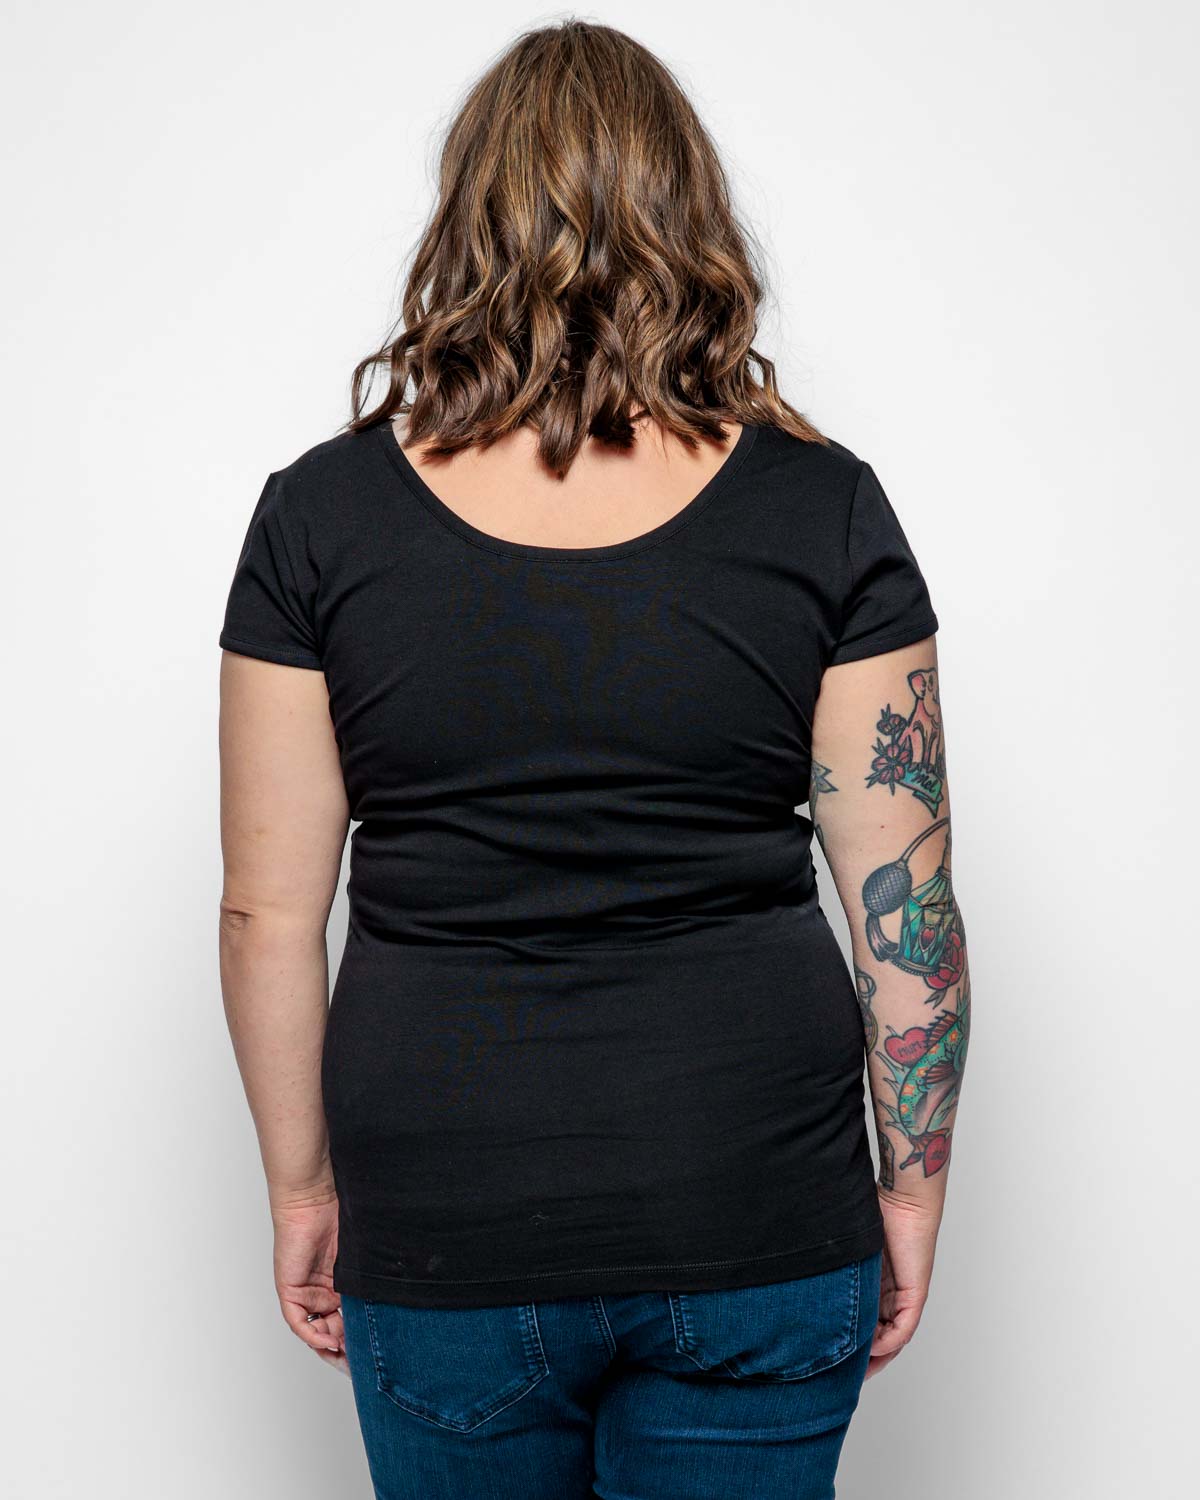 Maternity shirt sleeved t-shirt in Black Organic Cotton for pregnancy